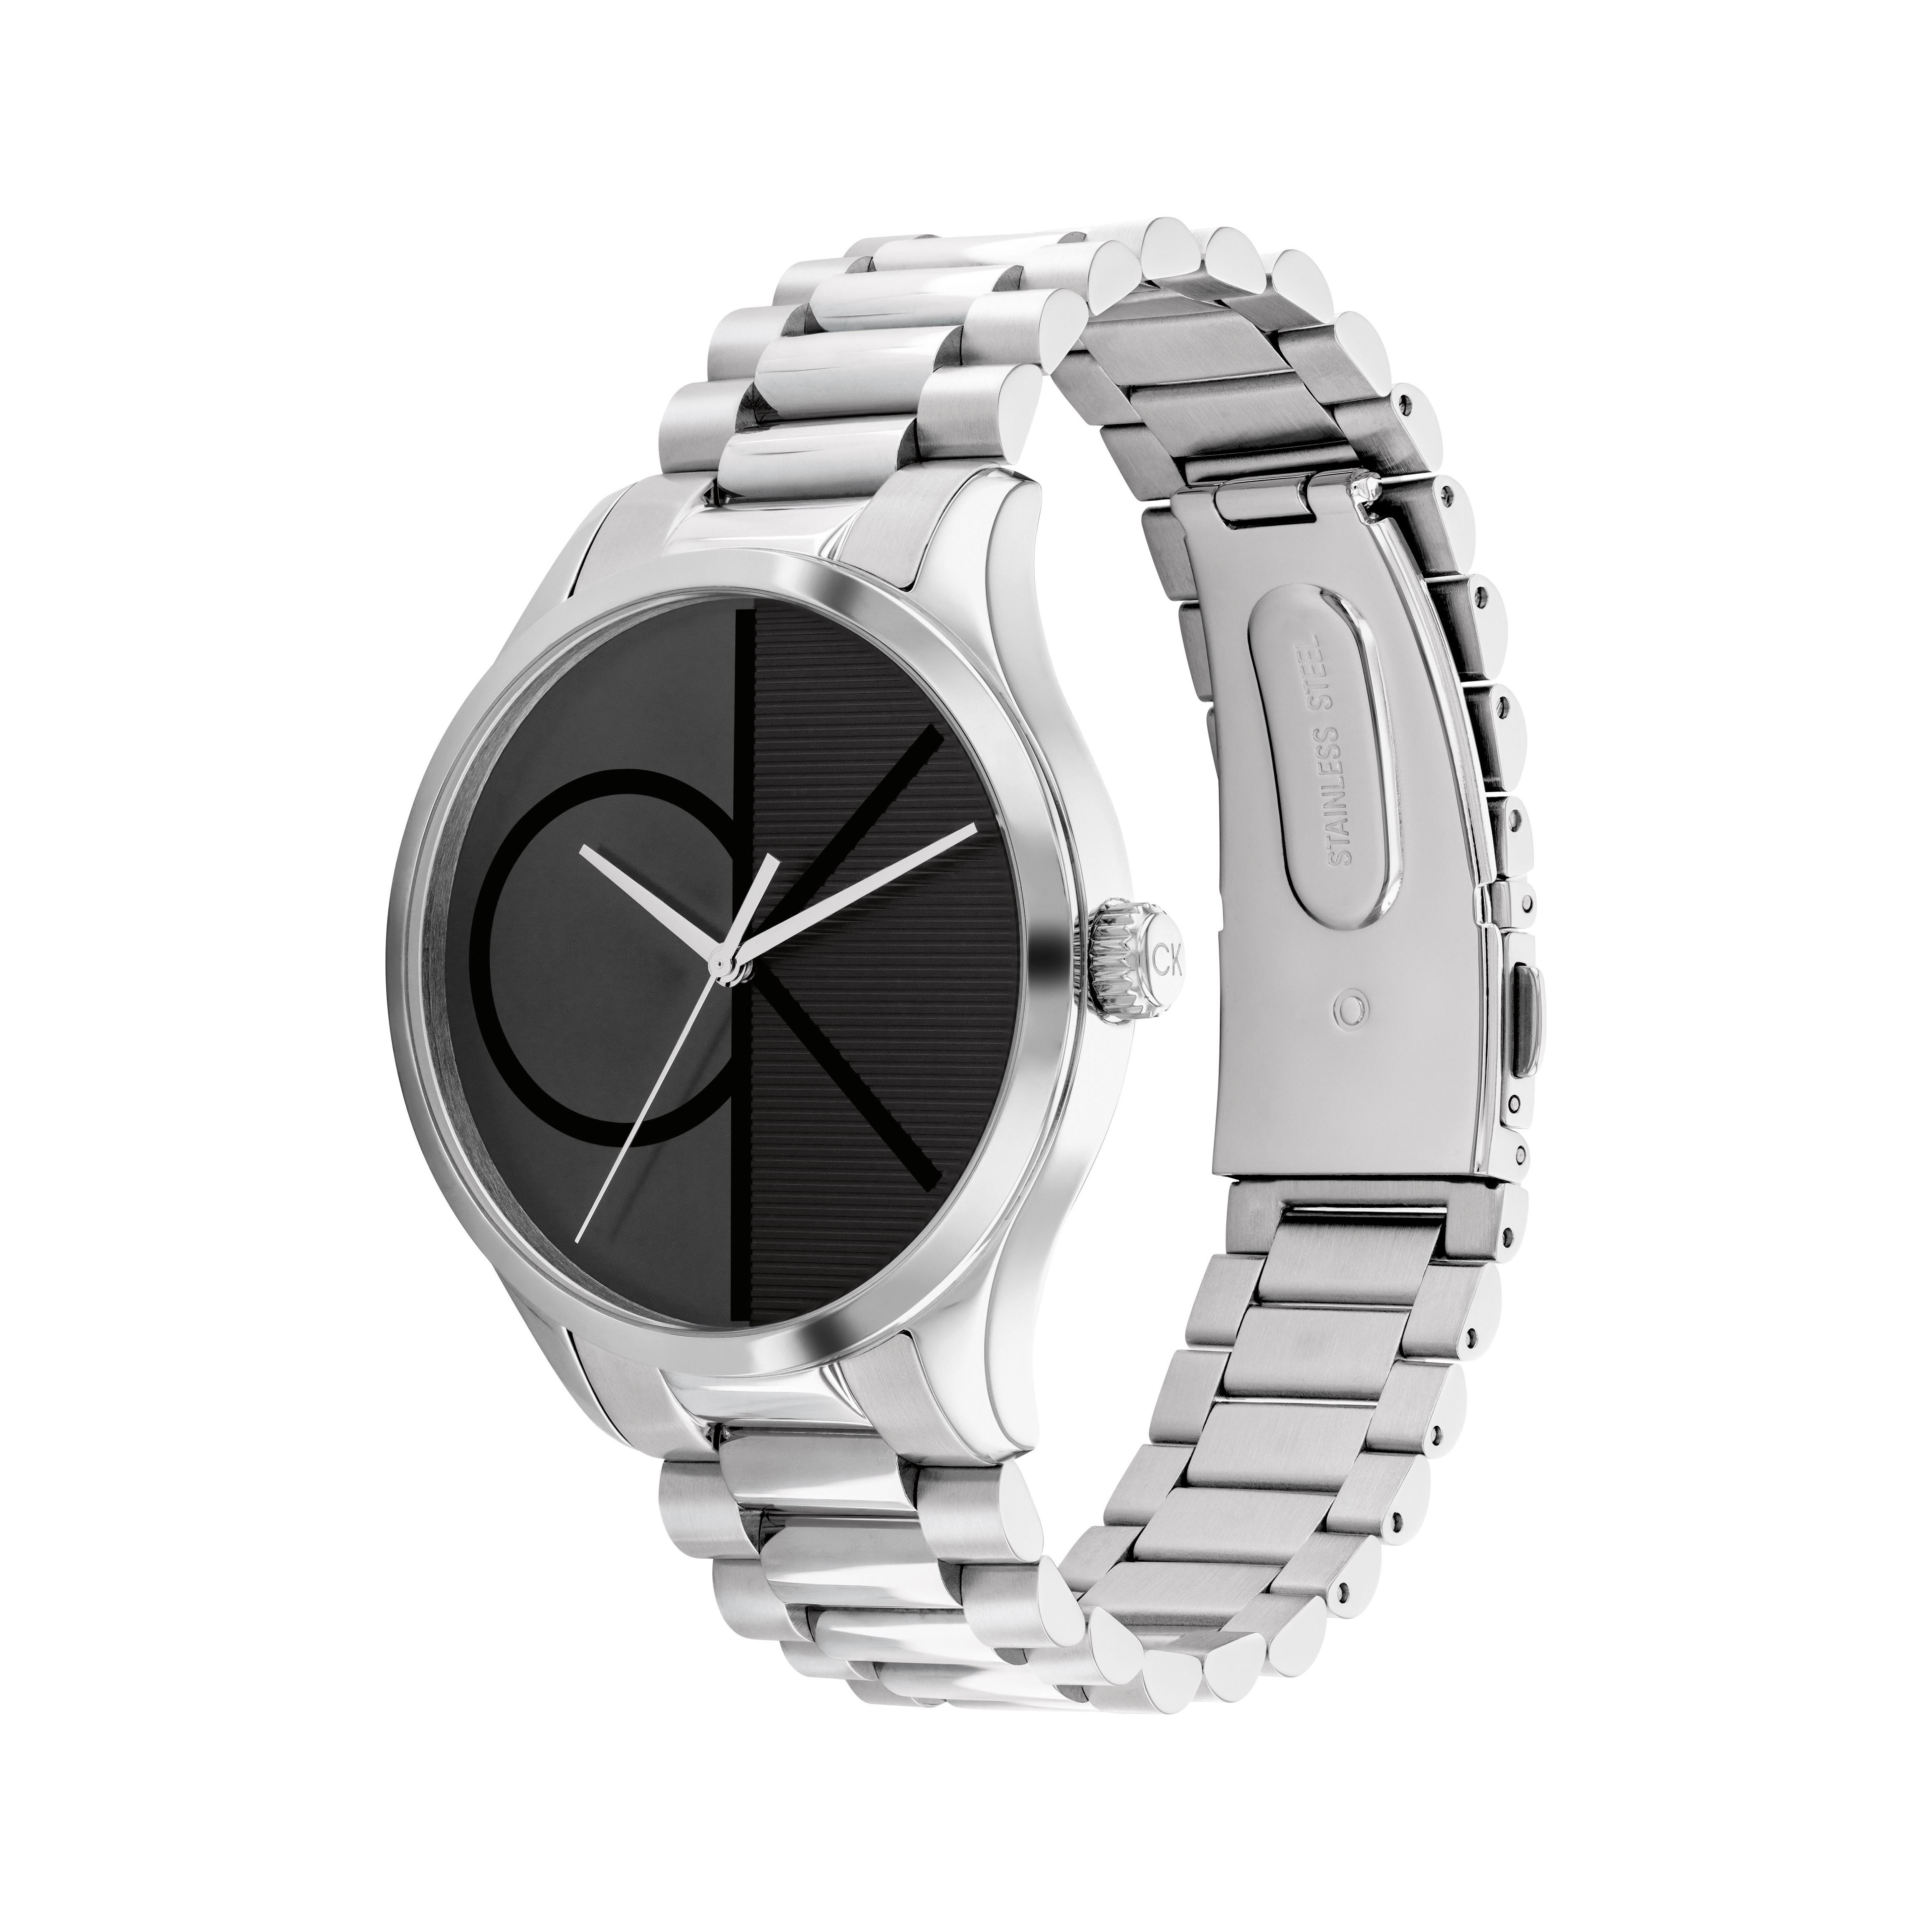 Unisex Silver-Tone Stainless Steel Watch Black CK Logo Dial